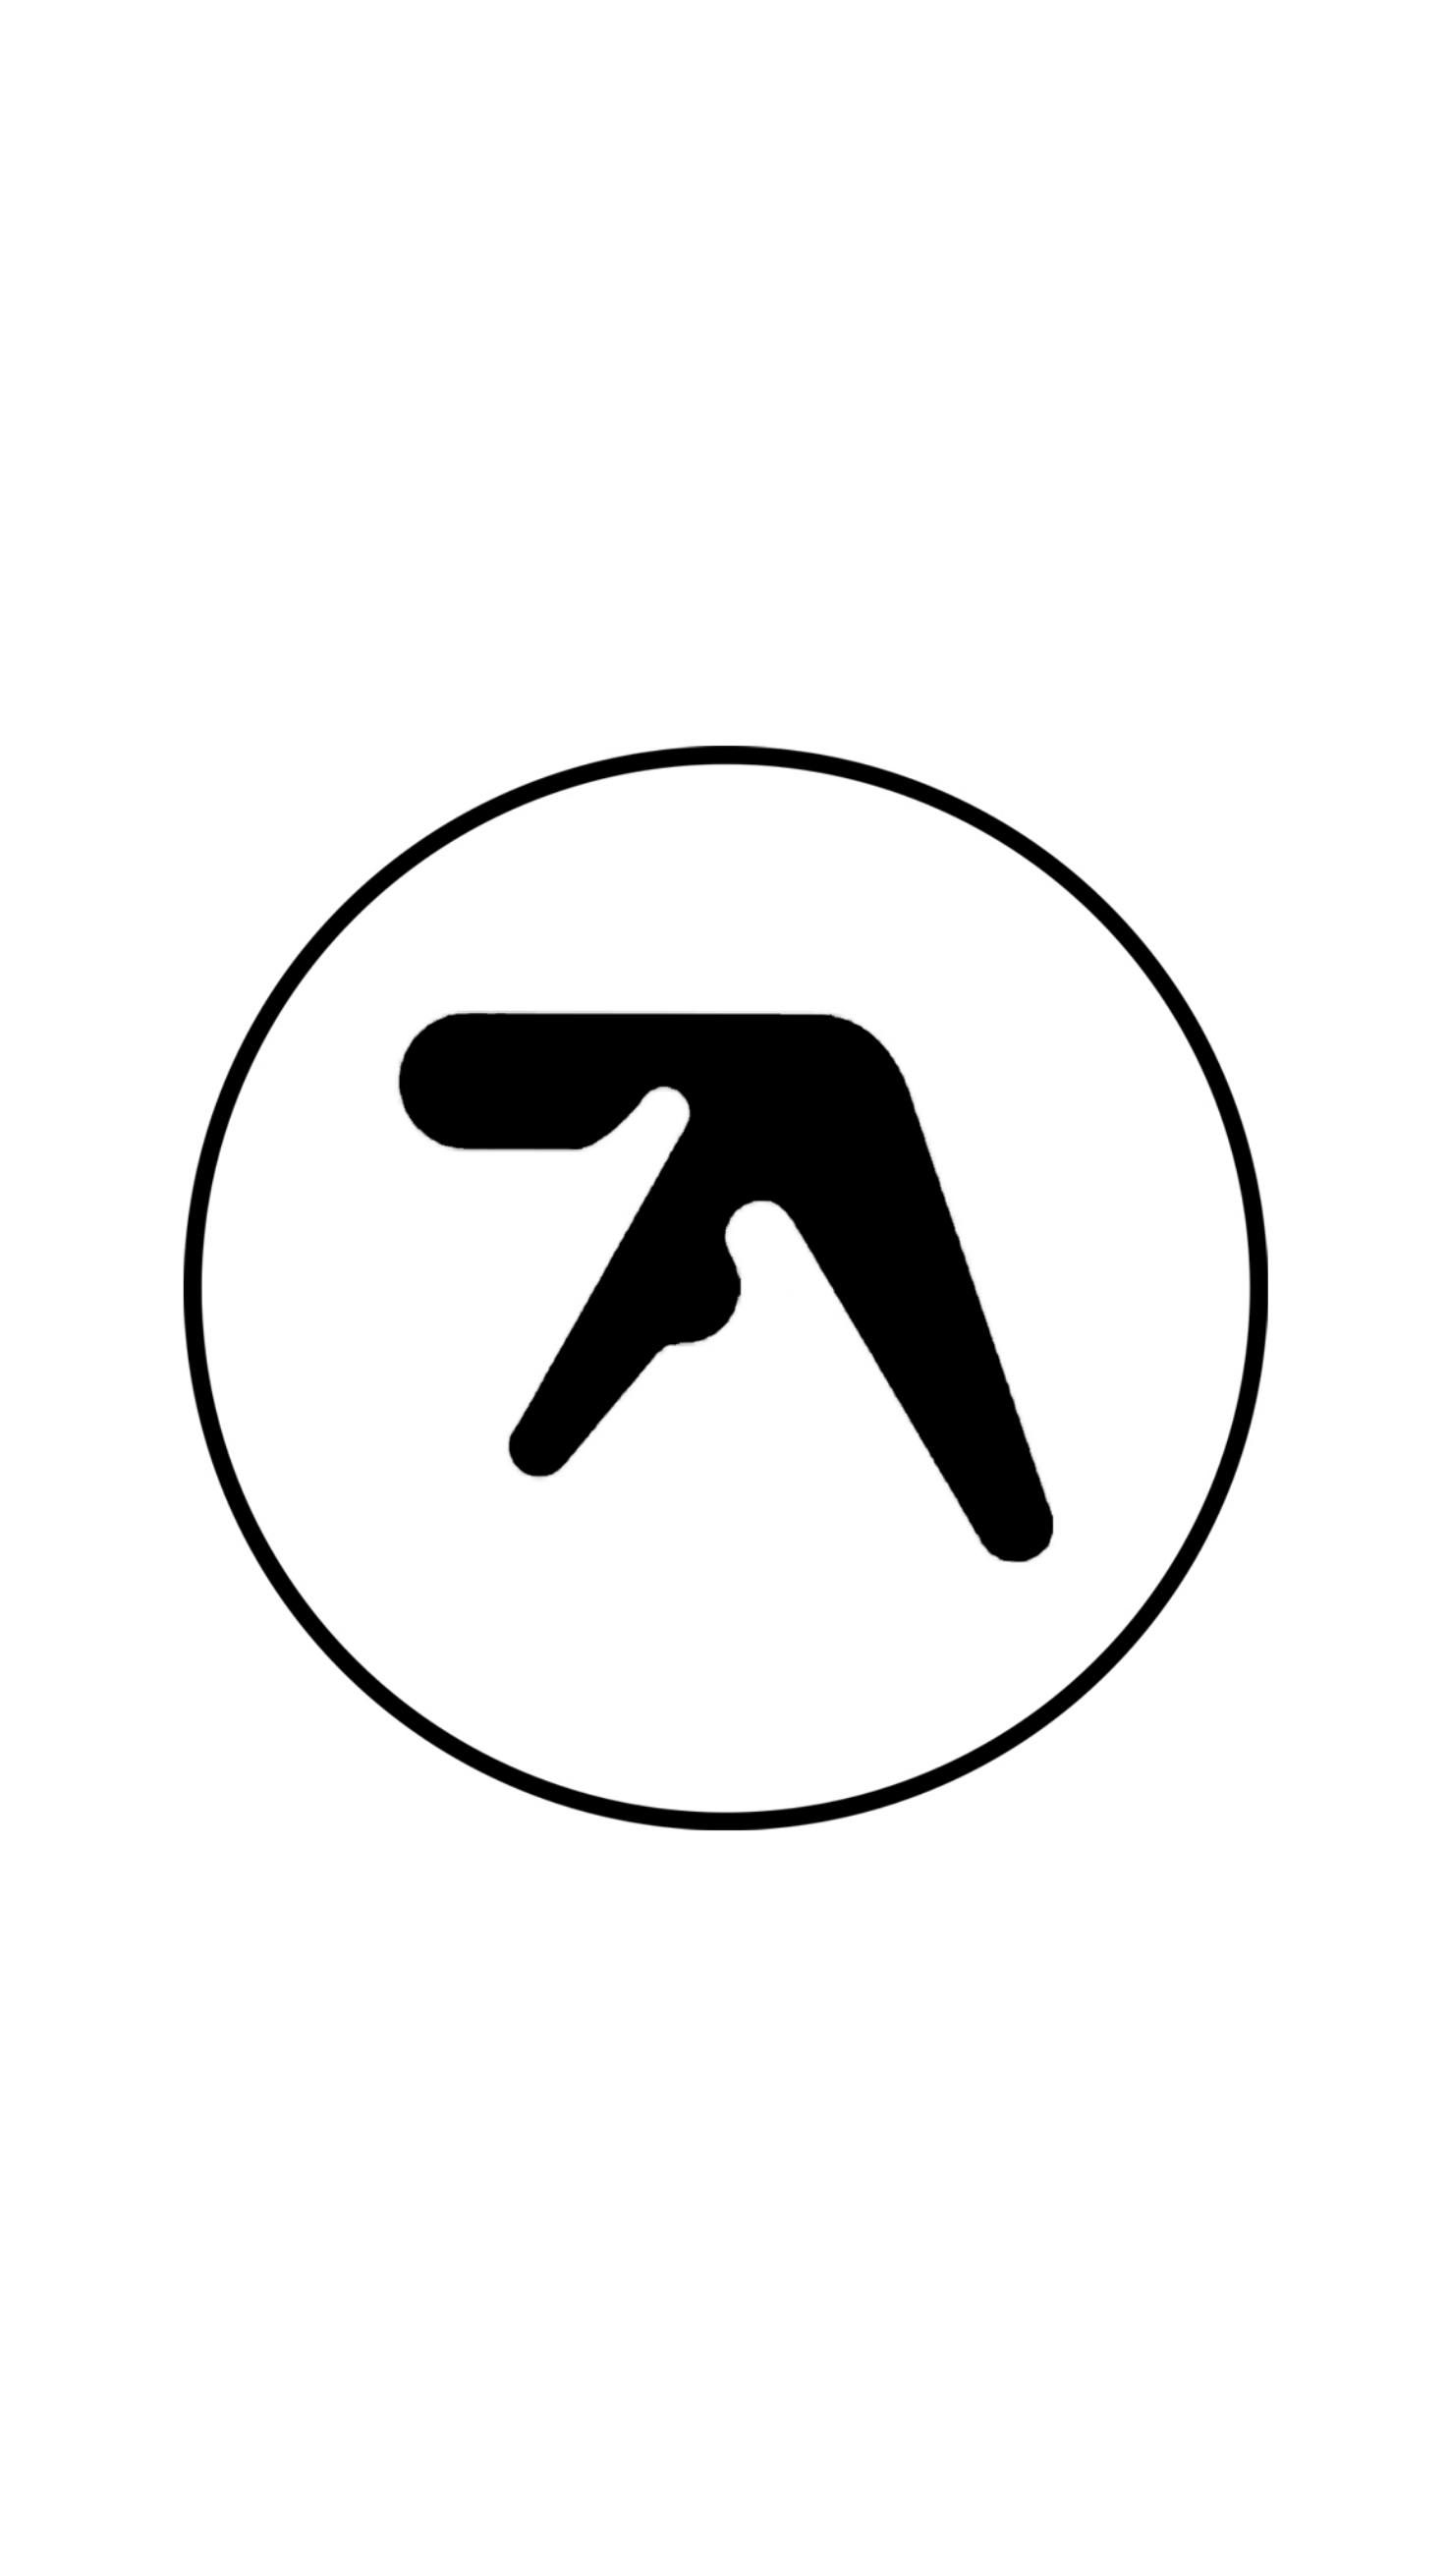 Aphex Twin Wallpapers